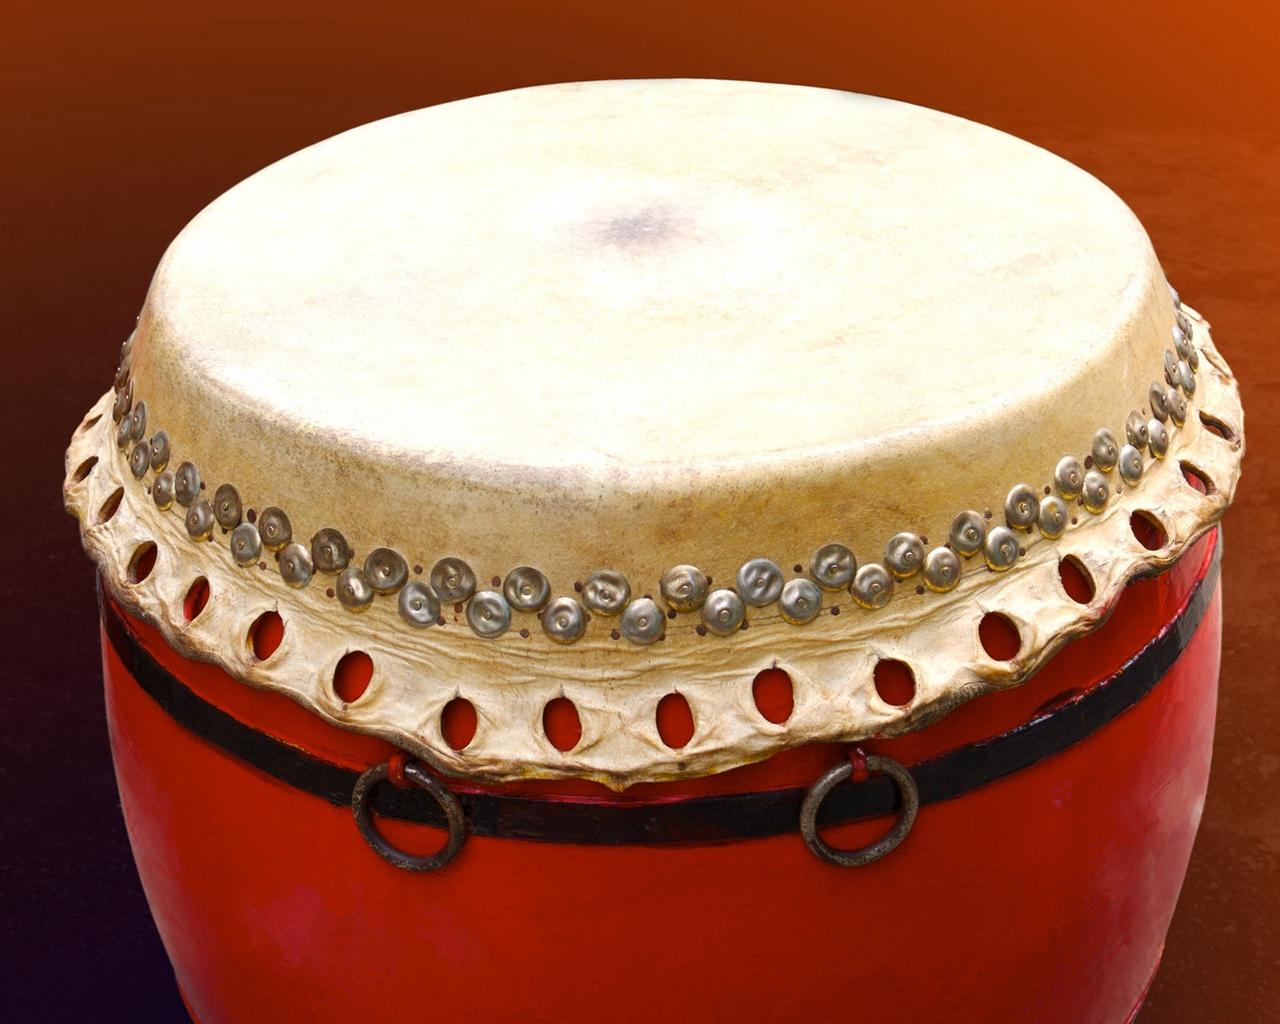 Download wallpaper 1280x1024 drums, percussion, musical instrument